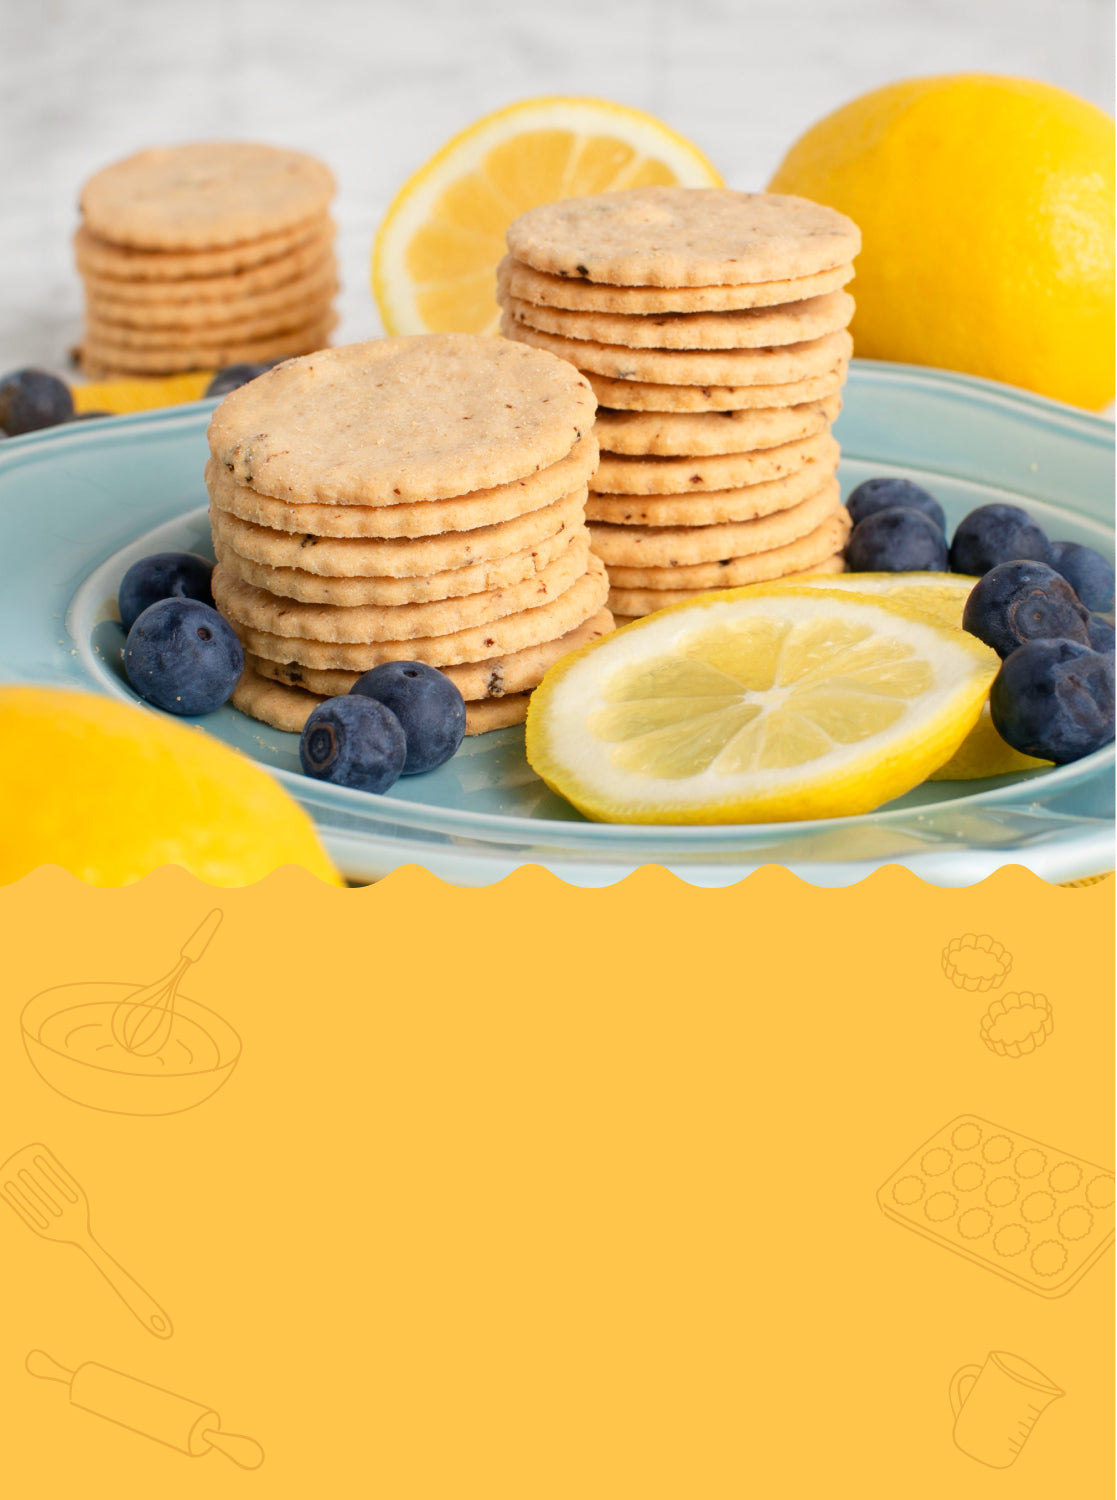 <p><strong>TREAT YOURSELF TO NEW BLUEBERRY LEMON COOKIES! </strong></p>